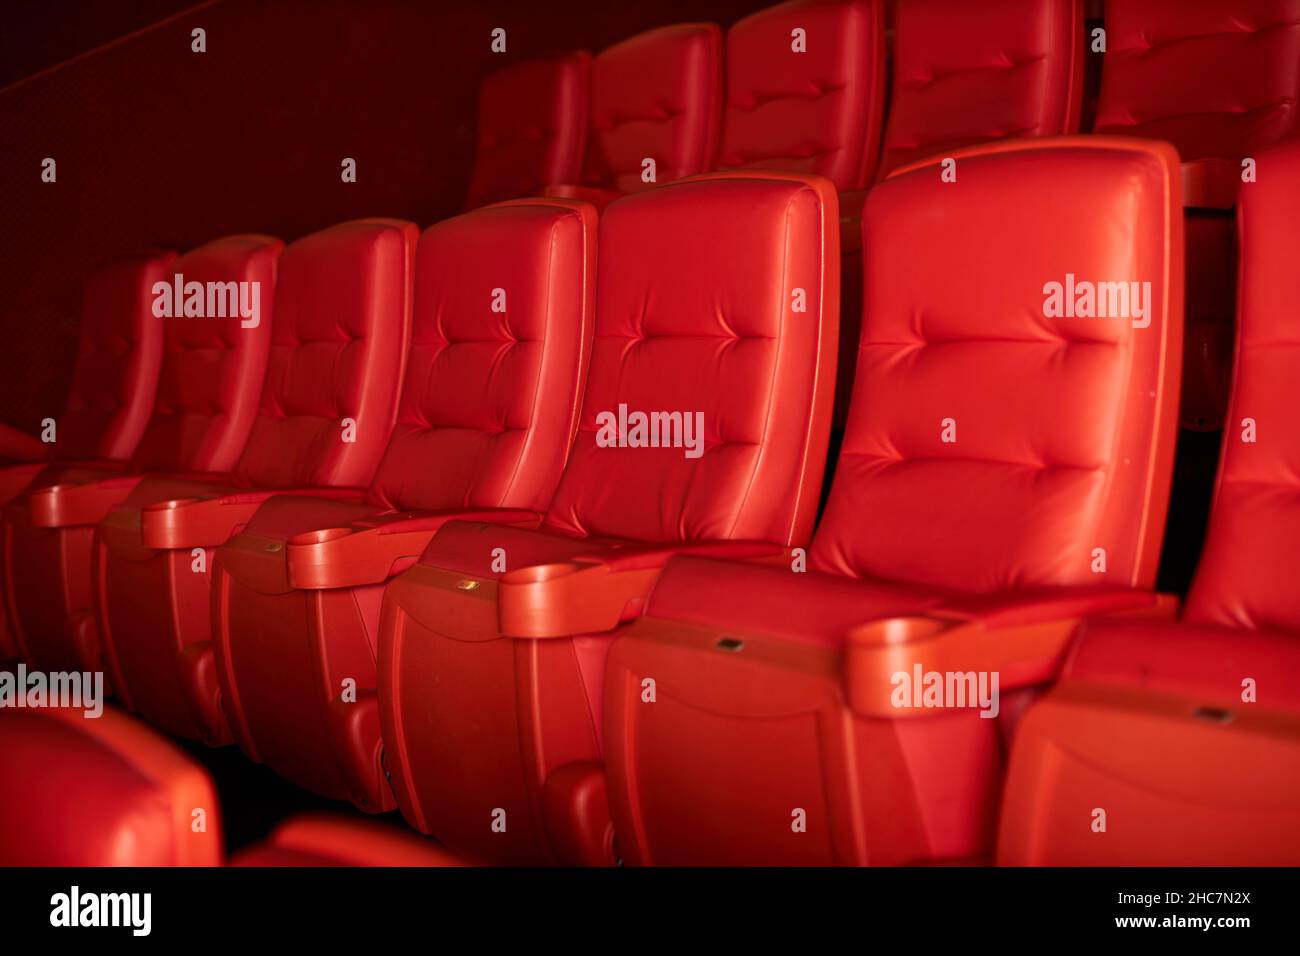 Empty rows of red theater or movie seats Stock Photo